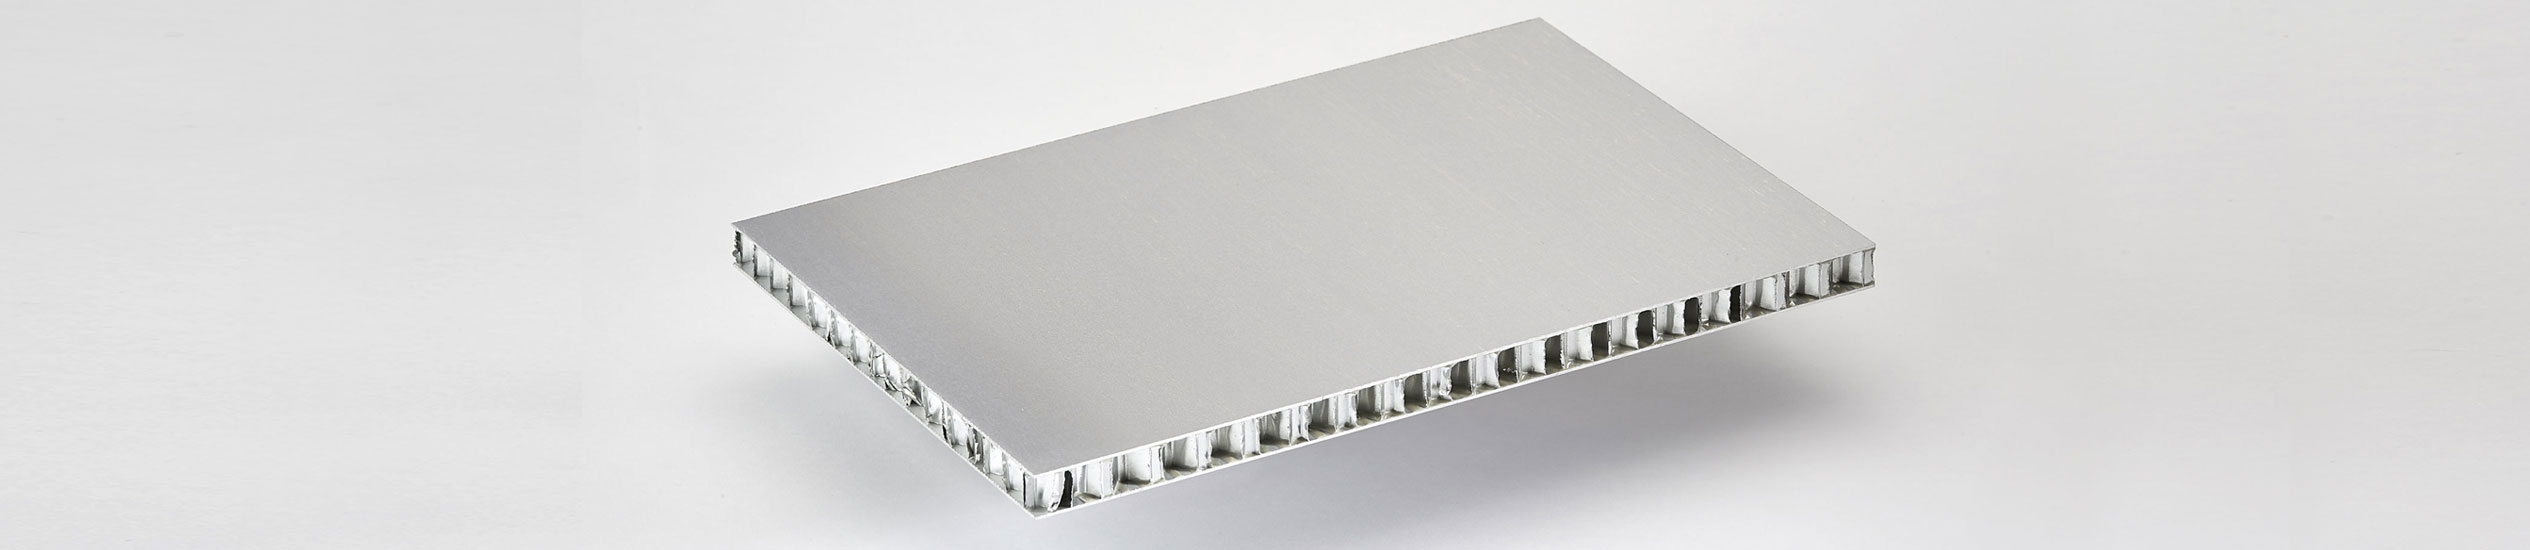 COMPOCEL® AL FR​ is a sandwich panel bonded with aluminium face material and with a core in aluminium honeycomb. It offers high mechanical properties and good